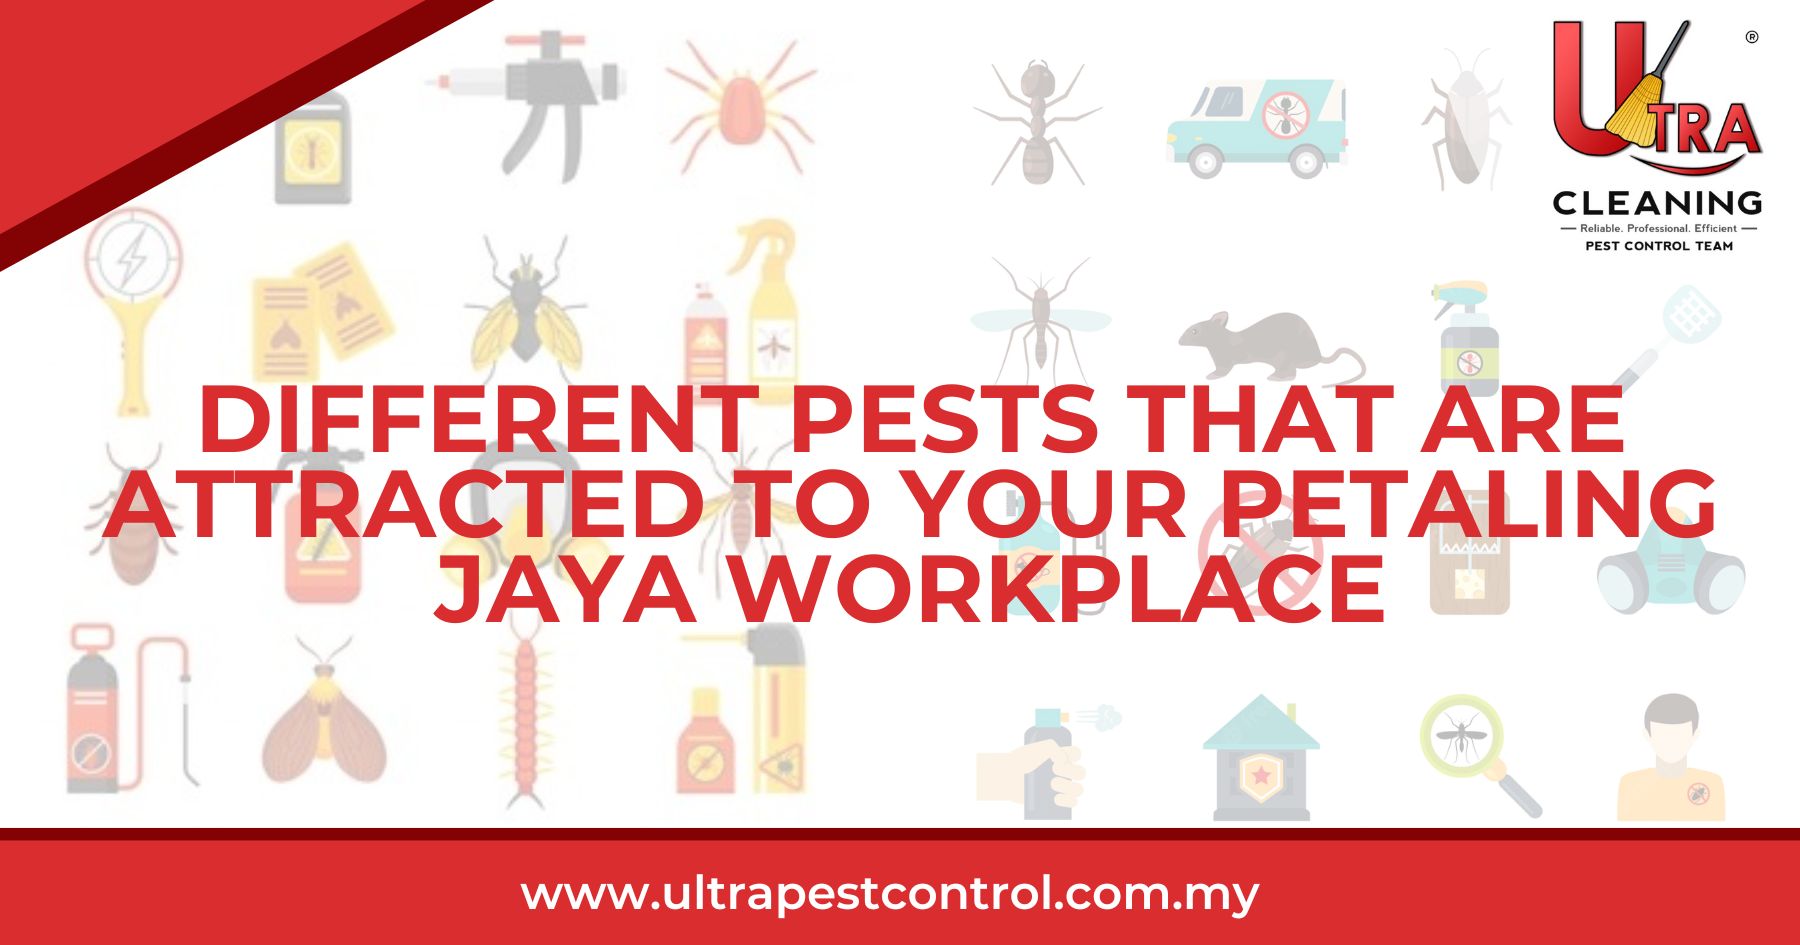 Different Pests That Are Attracted To Your Petaling Jaya Workplace